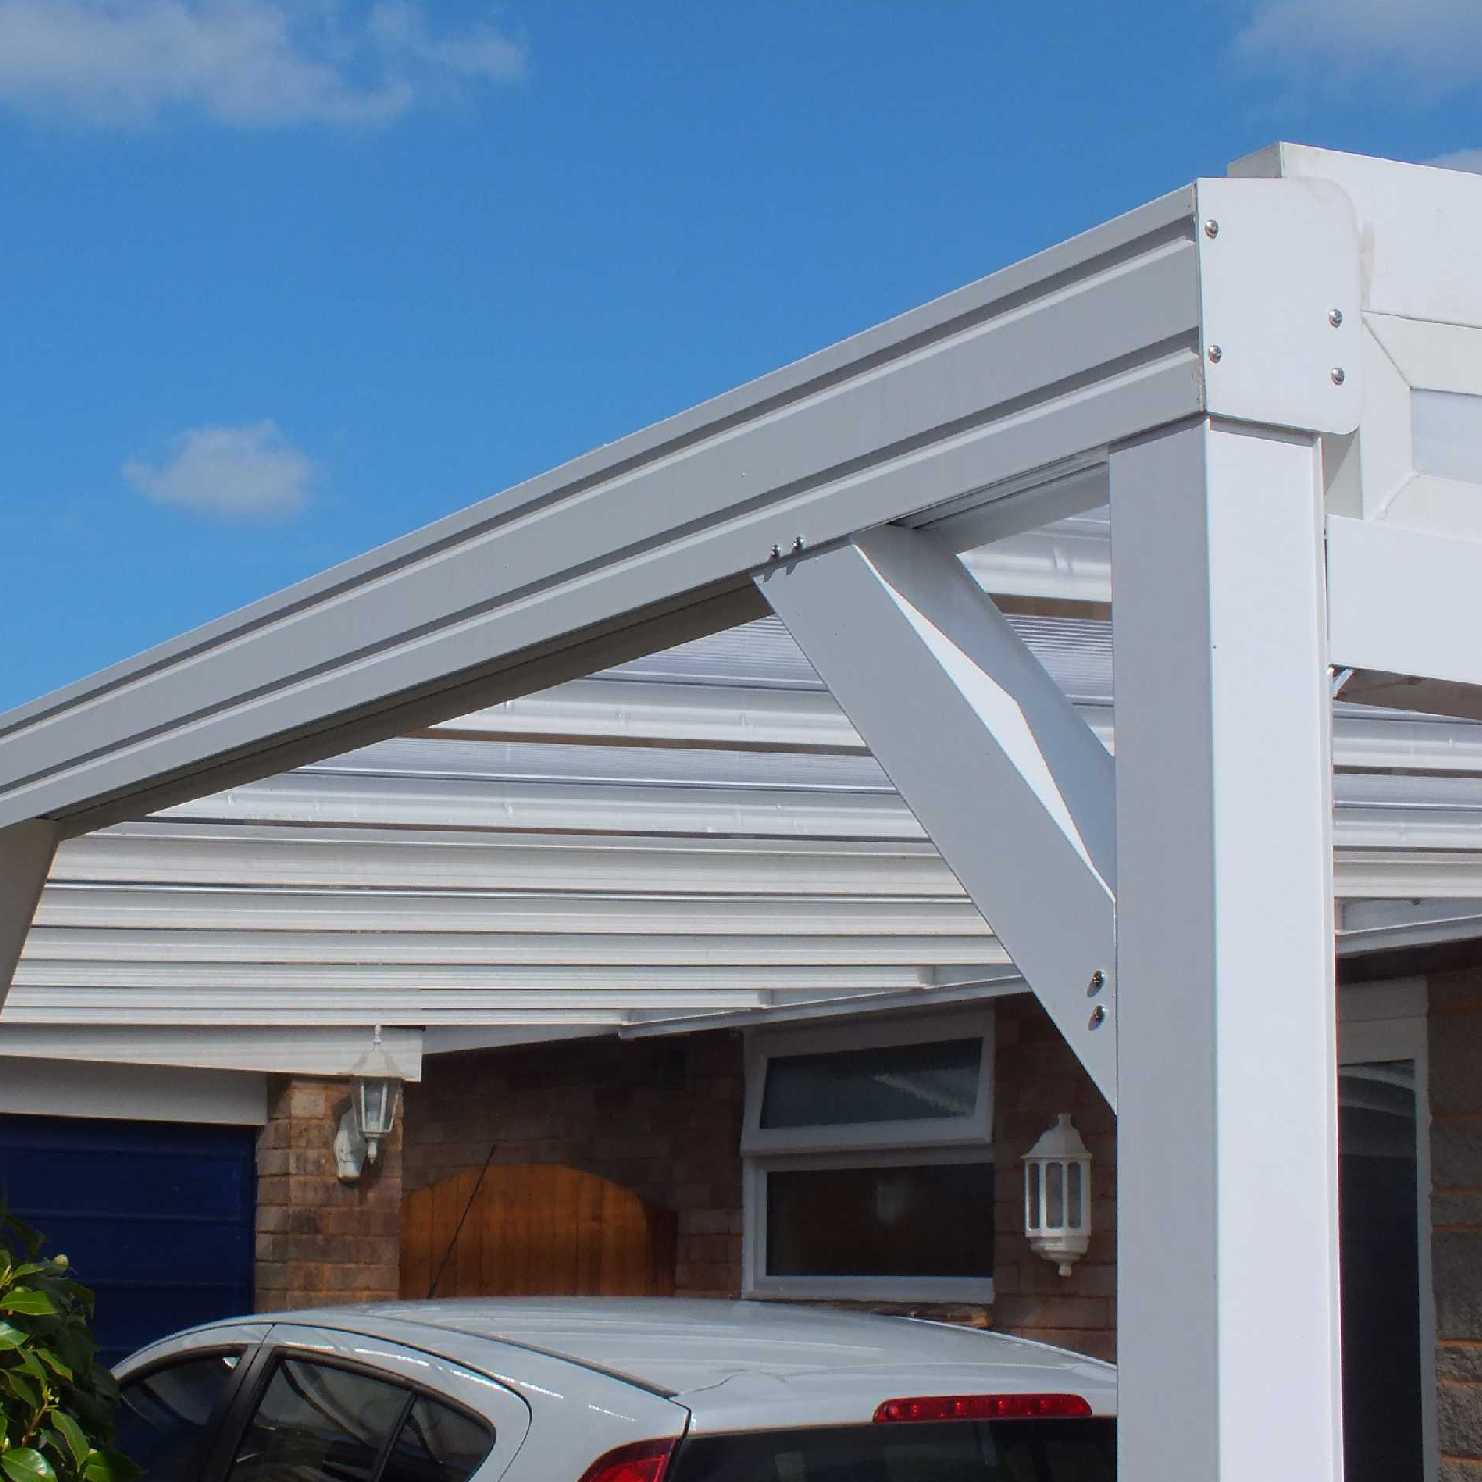 Great deals on Omega Smart Lean-To Canopy, White with 16mm Polycarbonate Glazing - 11.8m (W) x 4.5m (P), (5) Supporting Posts